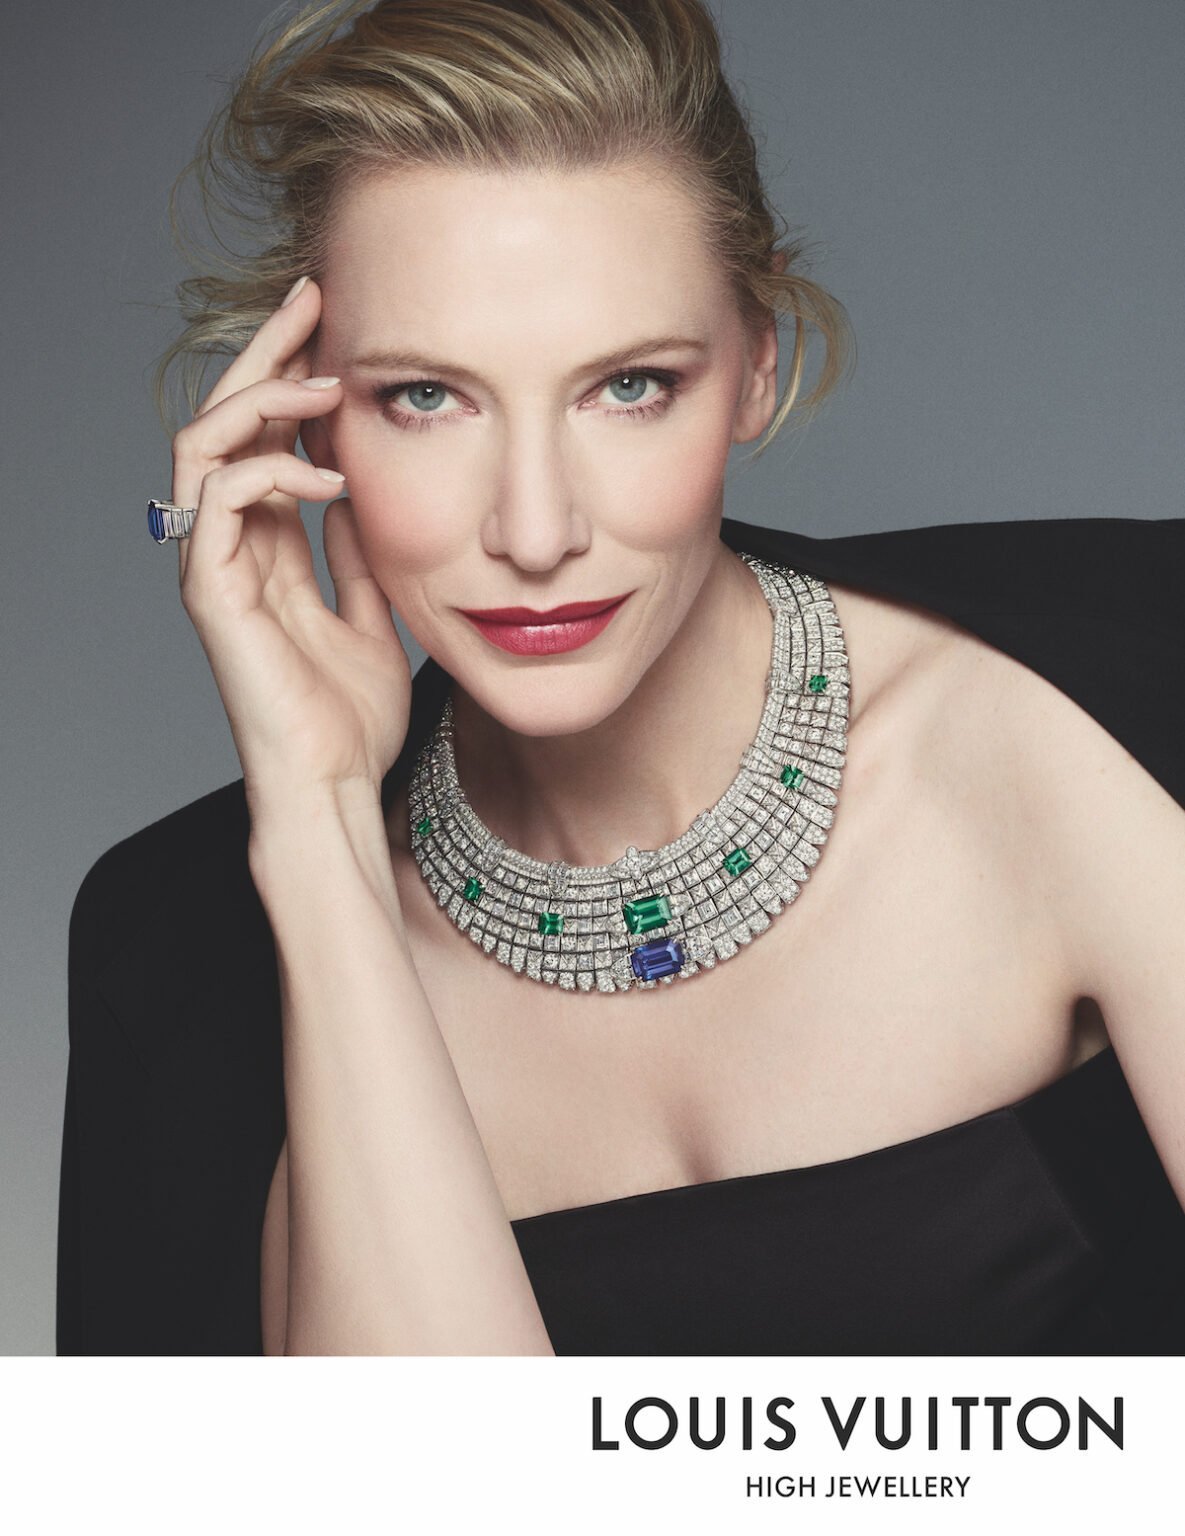 With Greece event Louis Vuitton affirms high jewellery ambitions  Vogue  Business